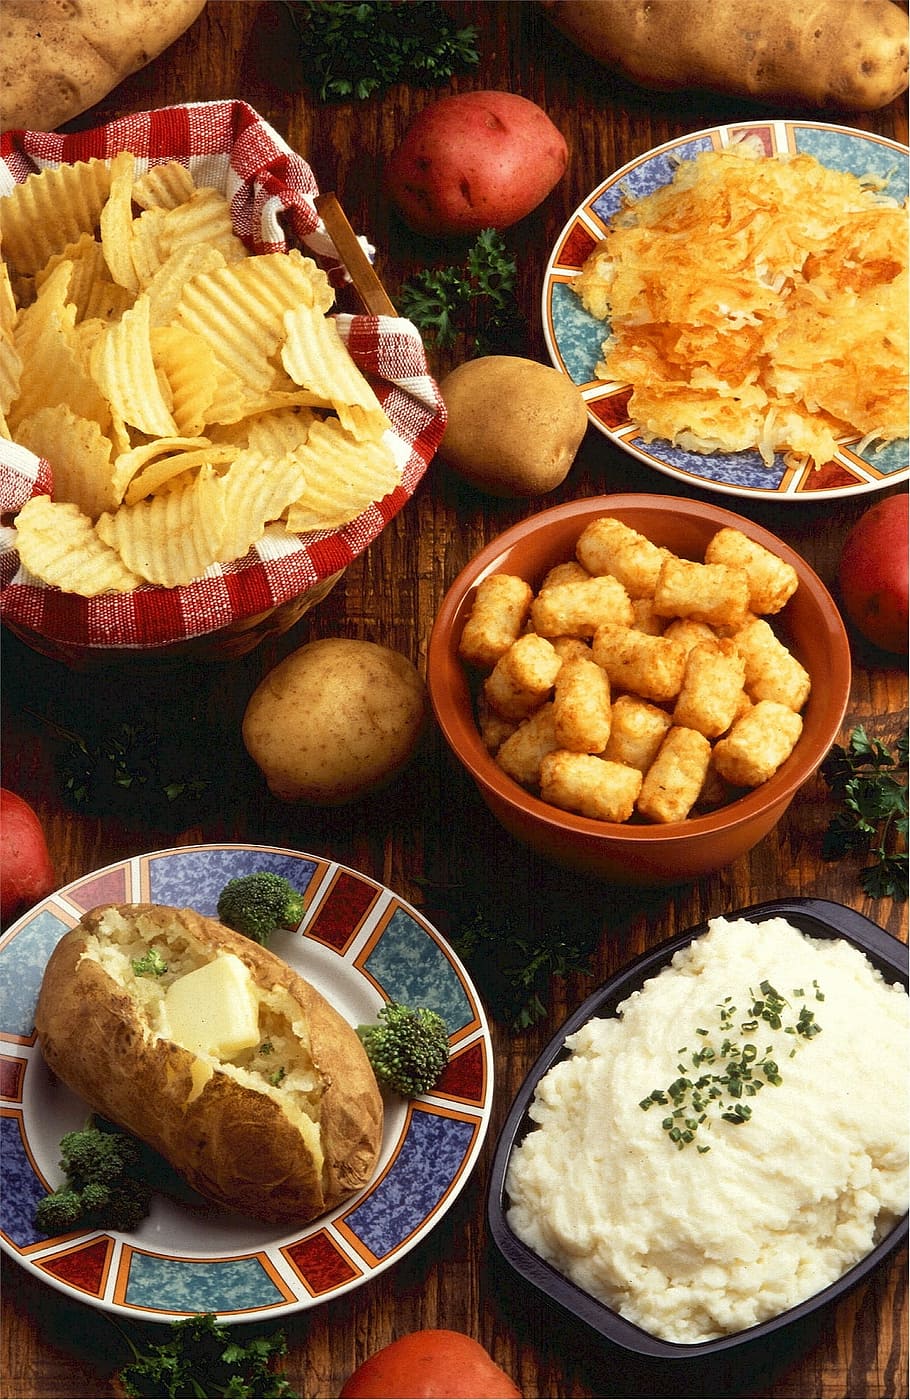 cooked potato foods, Potatoes, Dishes, Baked, Mashed, Chips, tater tots